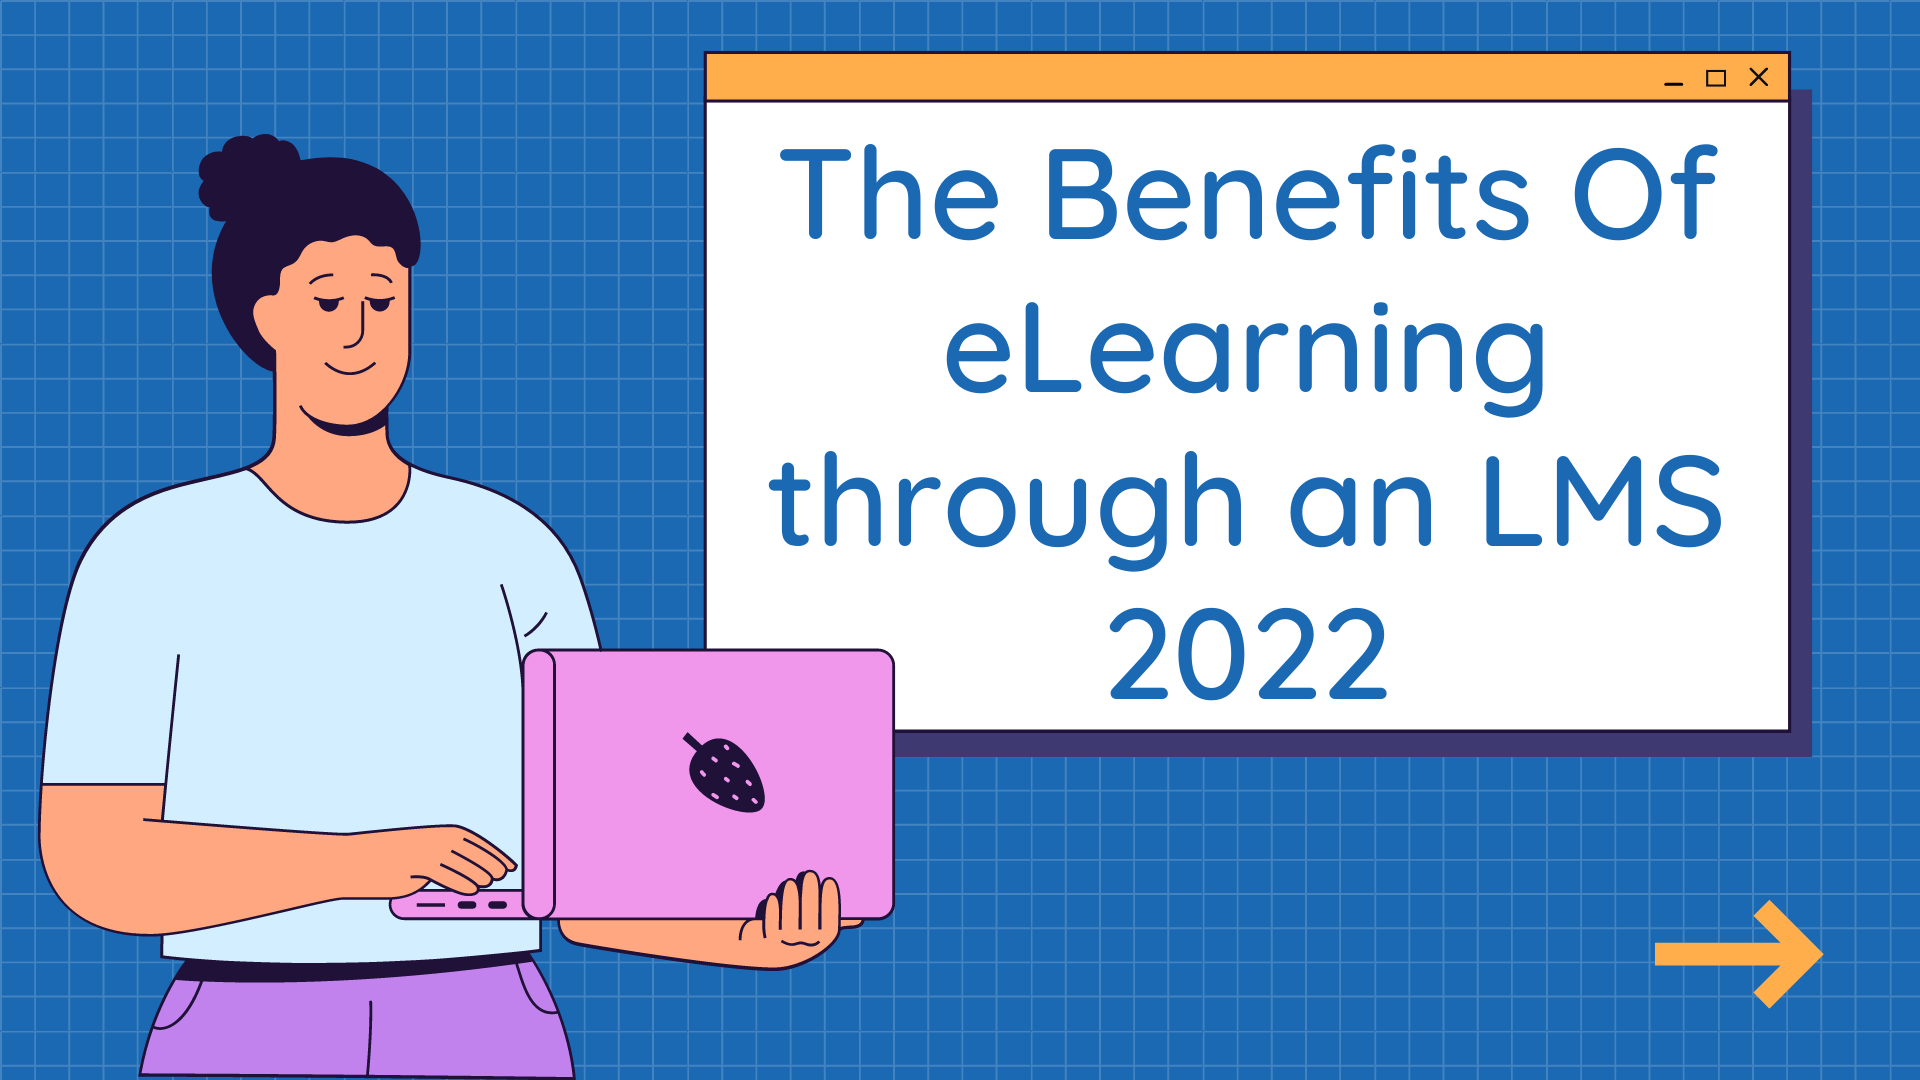 The Benefits Of eLearning through an LMS 2022